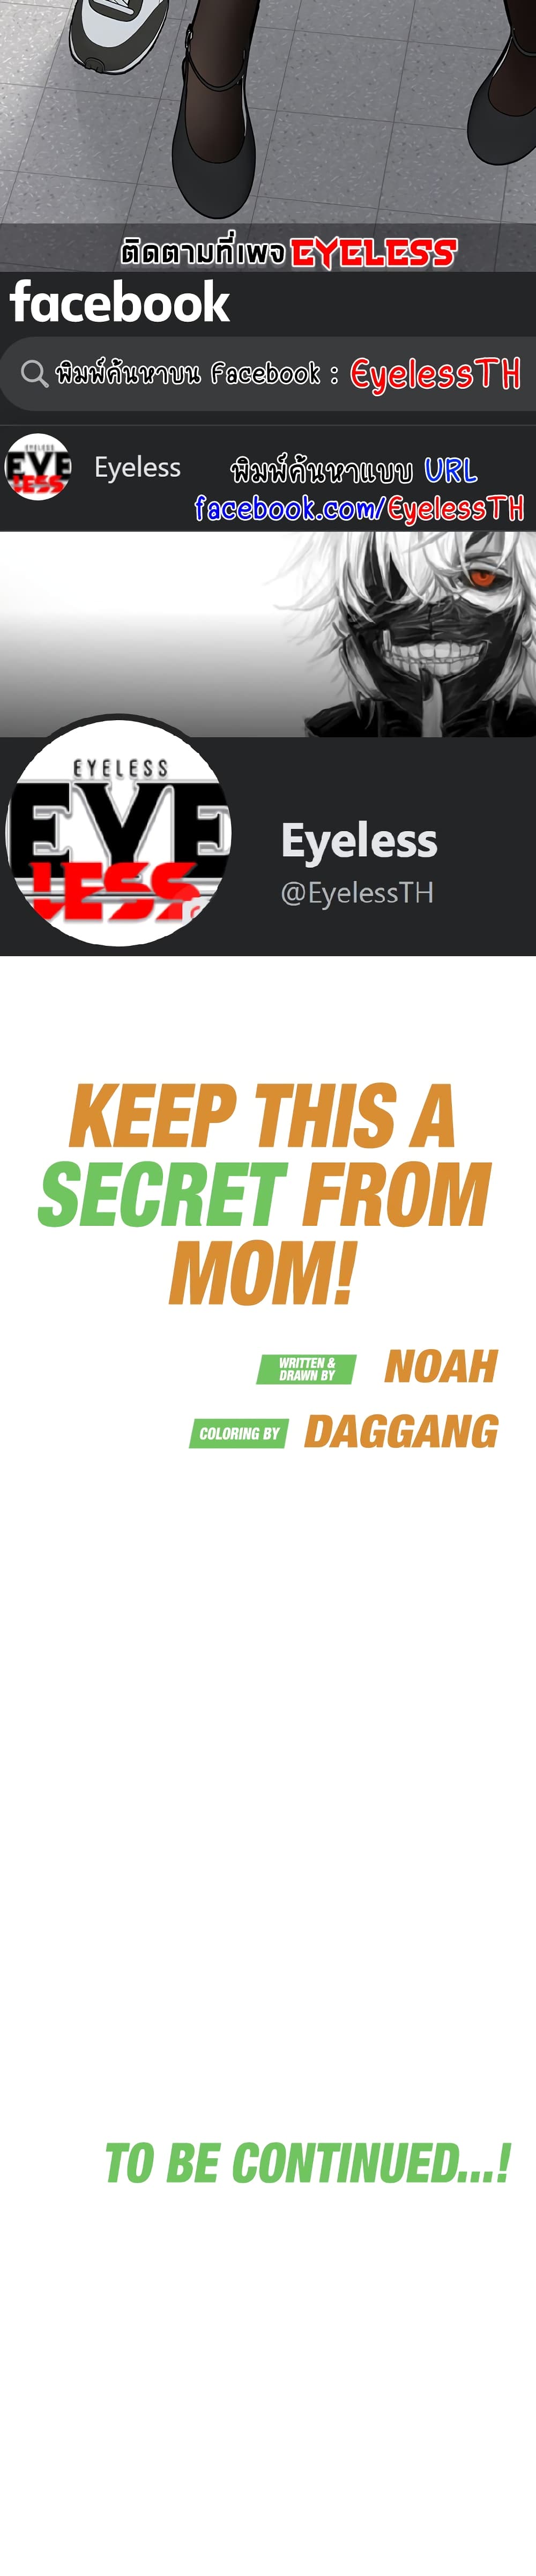 Keep it A Secret from Your Mother! 84 50